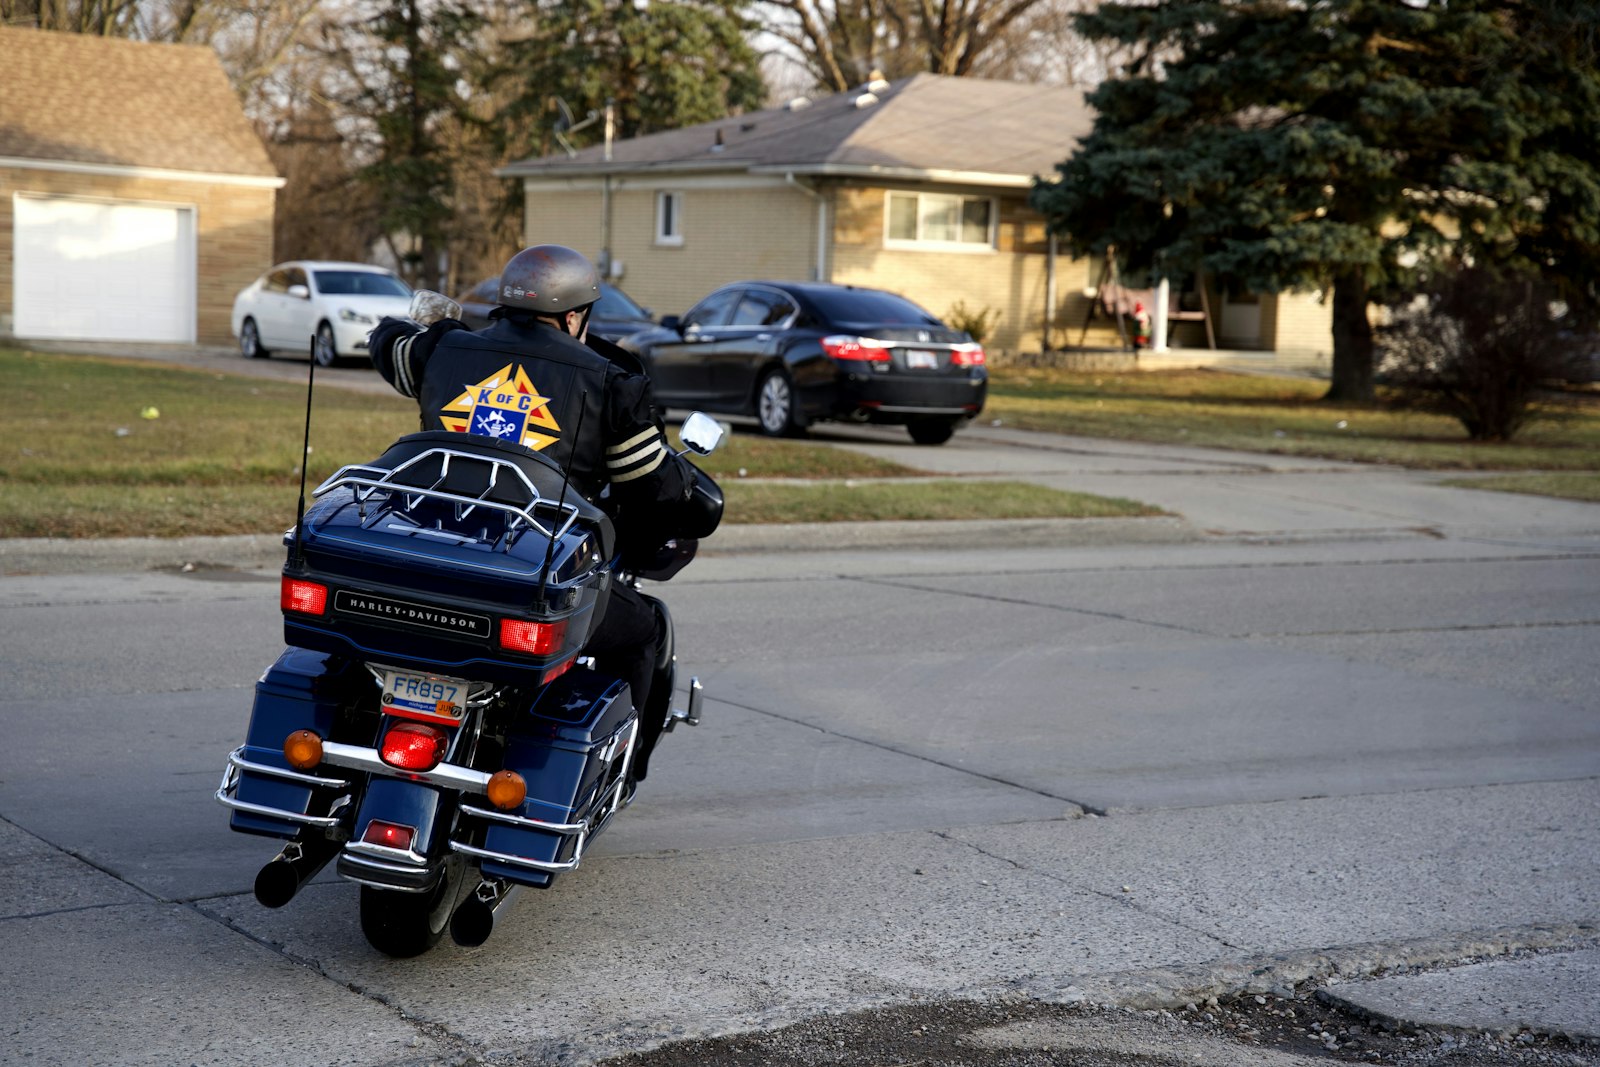 A Knight rides into the sunset after a gathering at St. Mark Parish in Warren. Men have been called upon to provide motorcycle escorts for their fellow Knights of Columbus, and they are preparing to escort Cardinal Raymond Burke for a second time later this year.